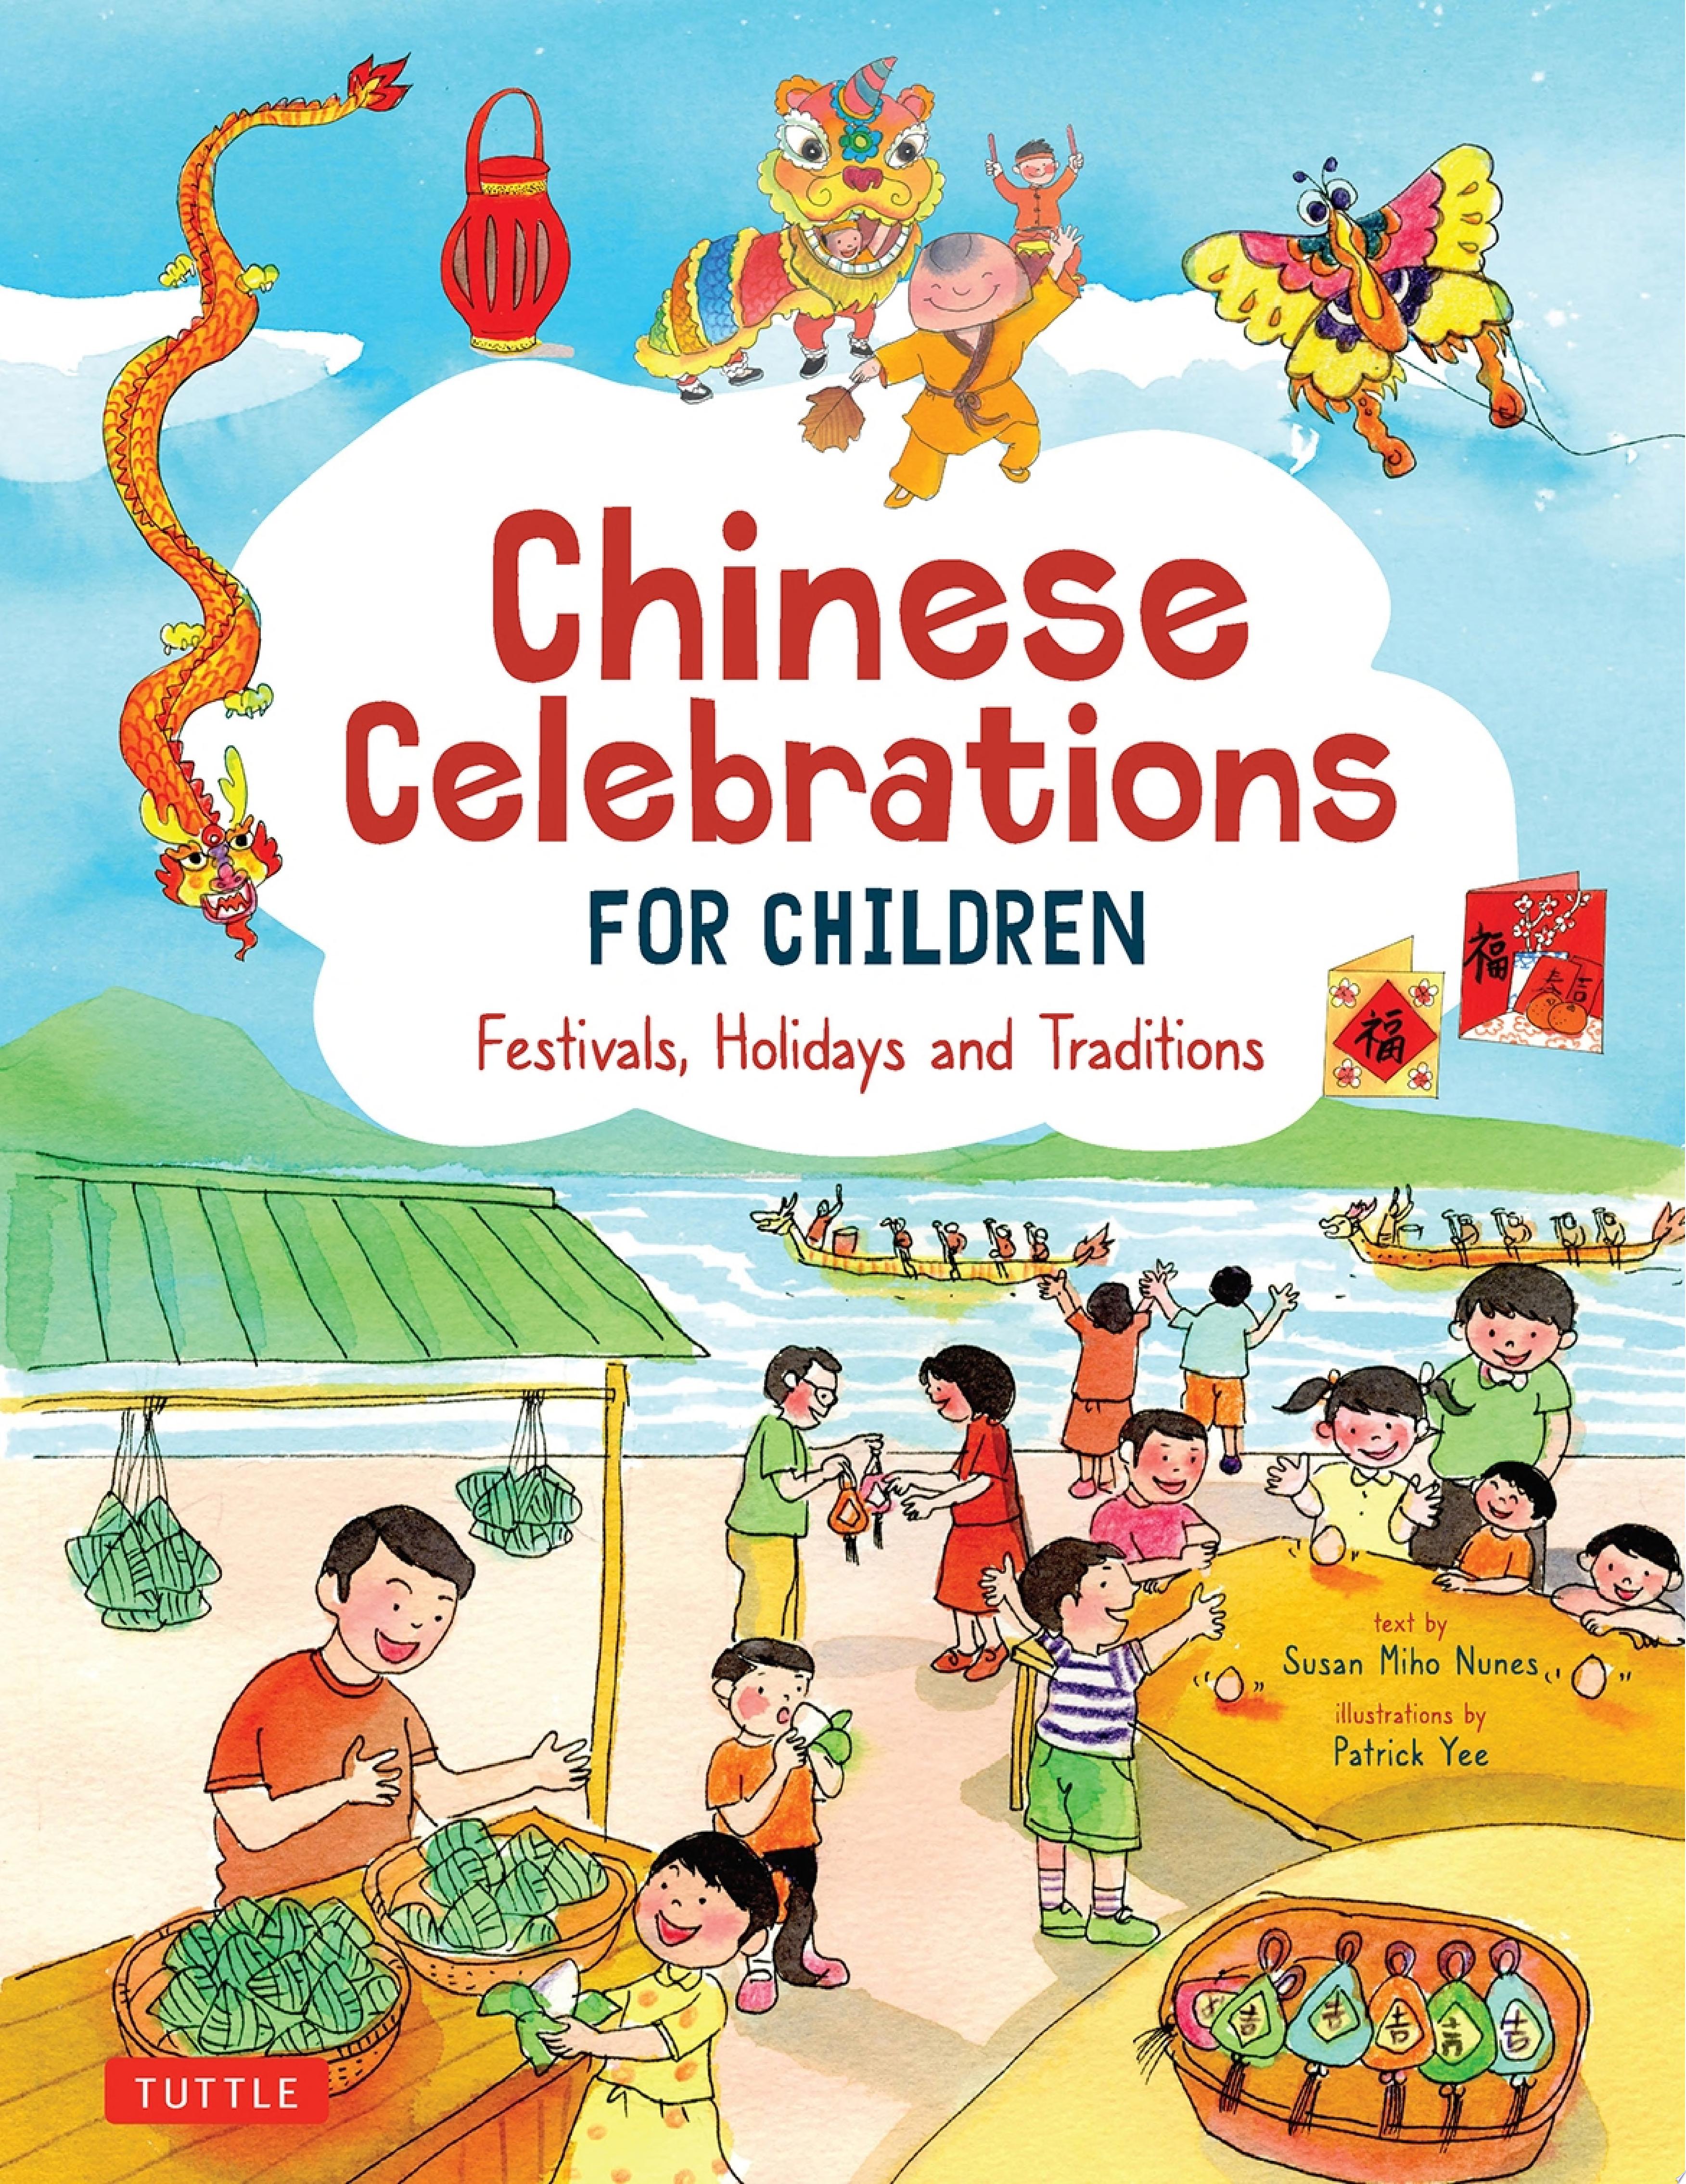 Image for "Chinese Celebrations for Children"